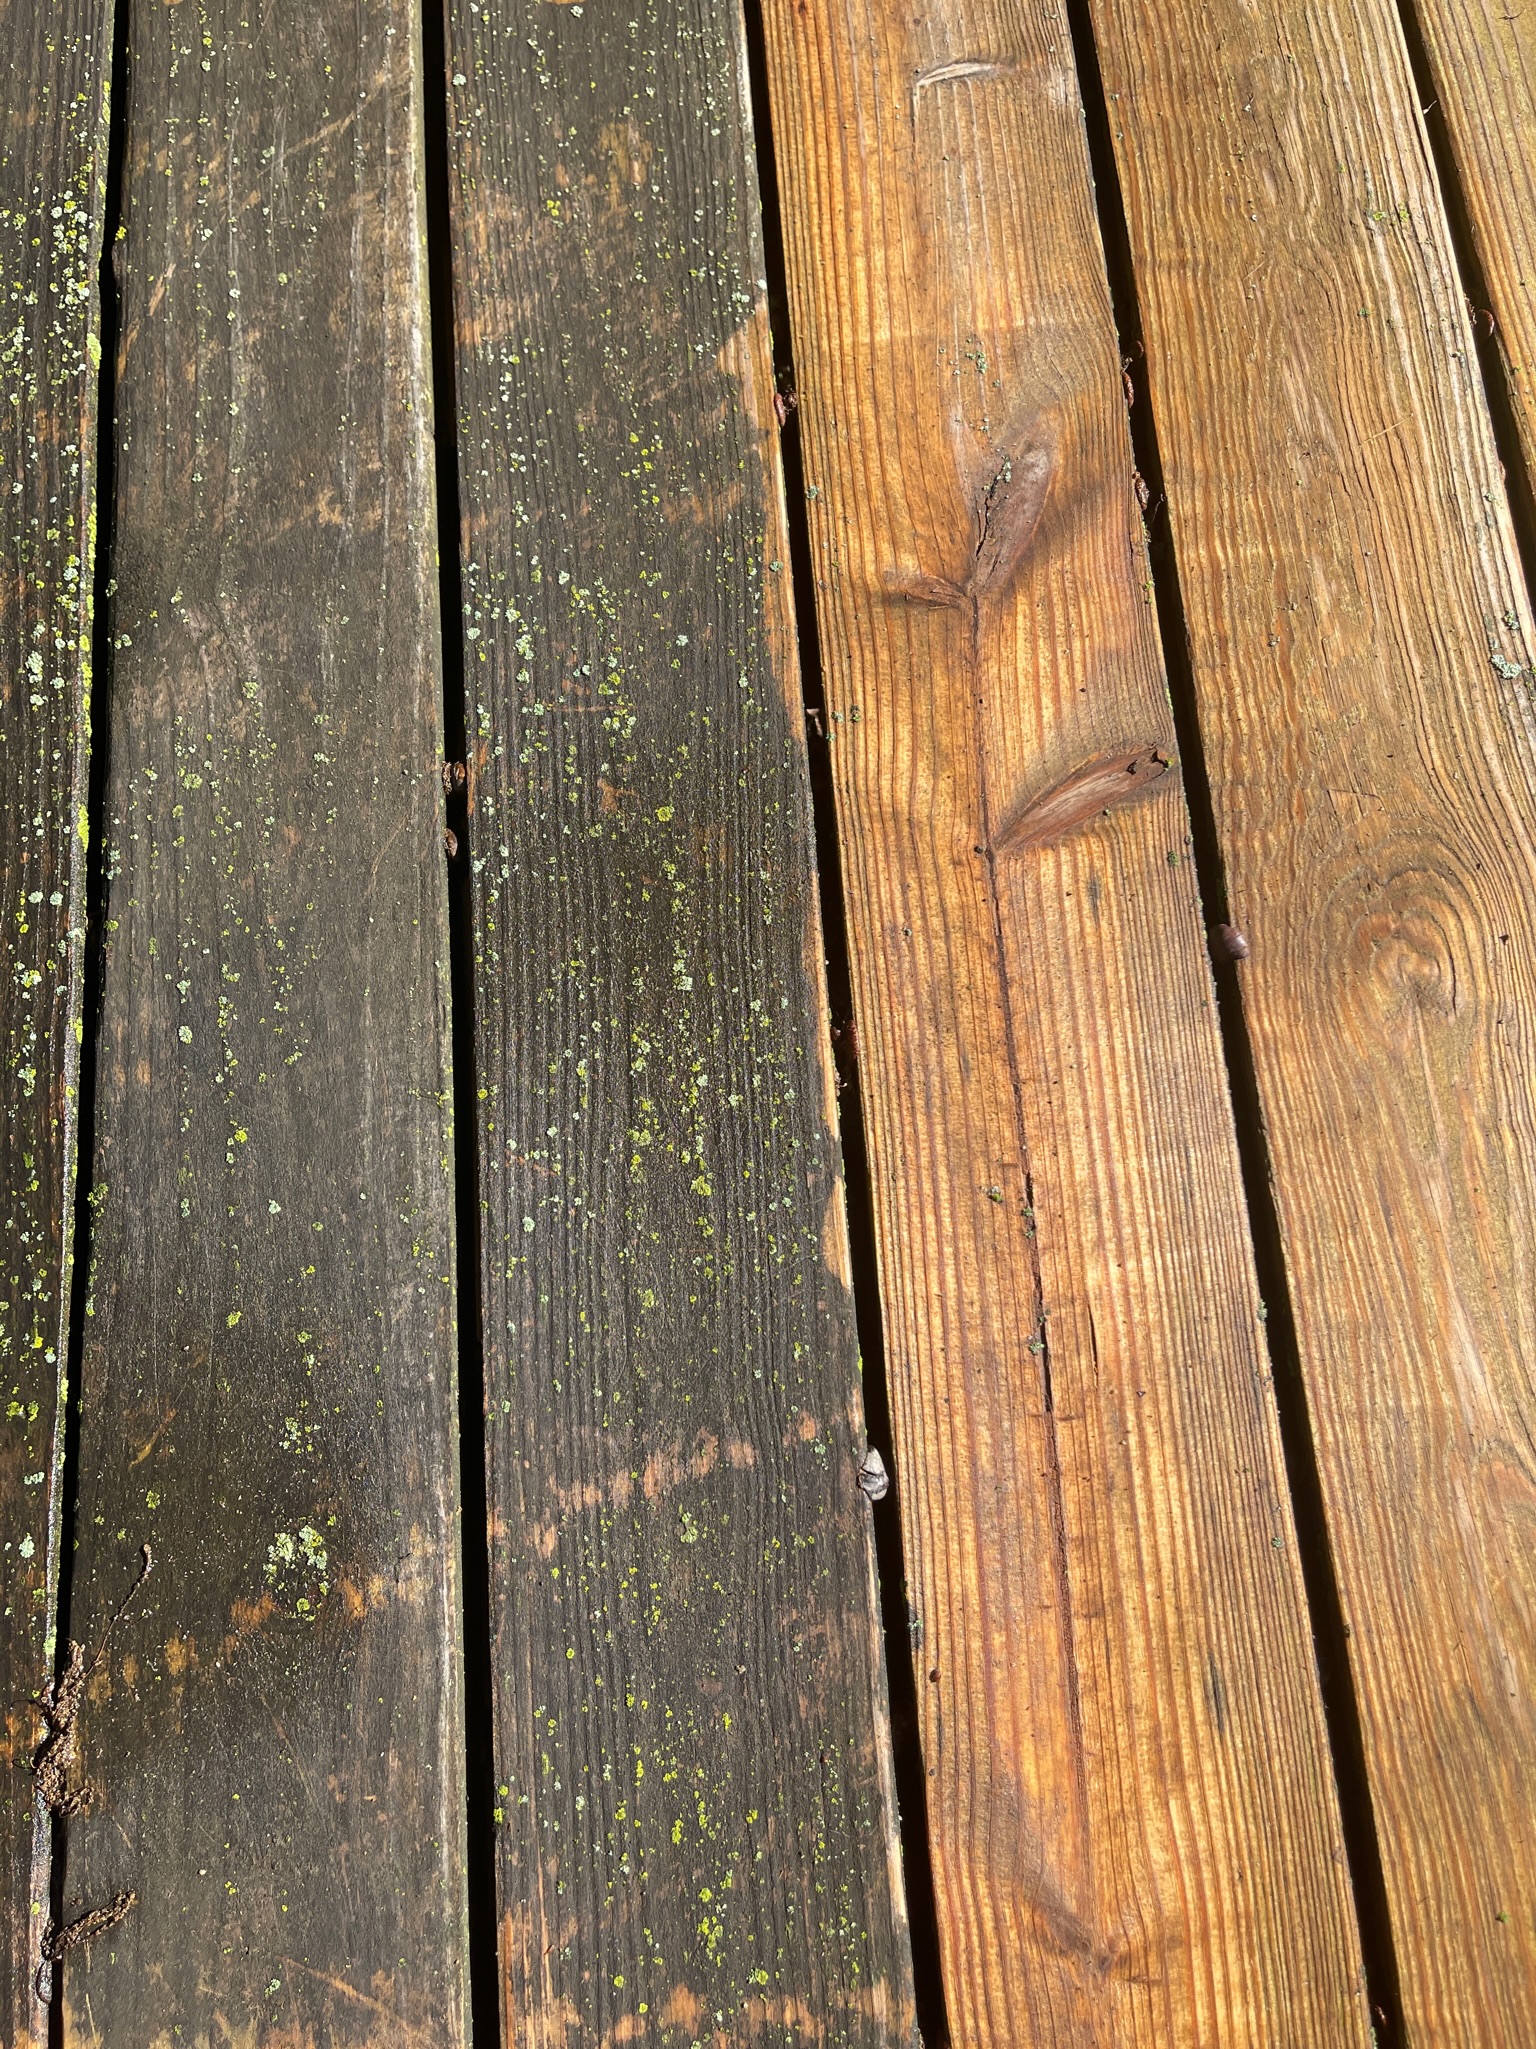 Professional Deck Washing in Springfield, MO 